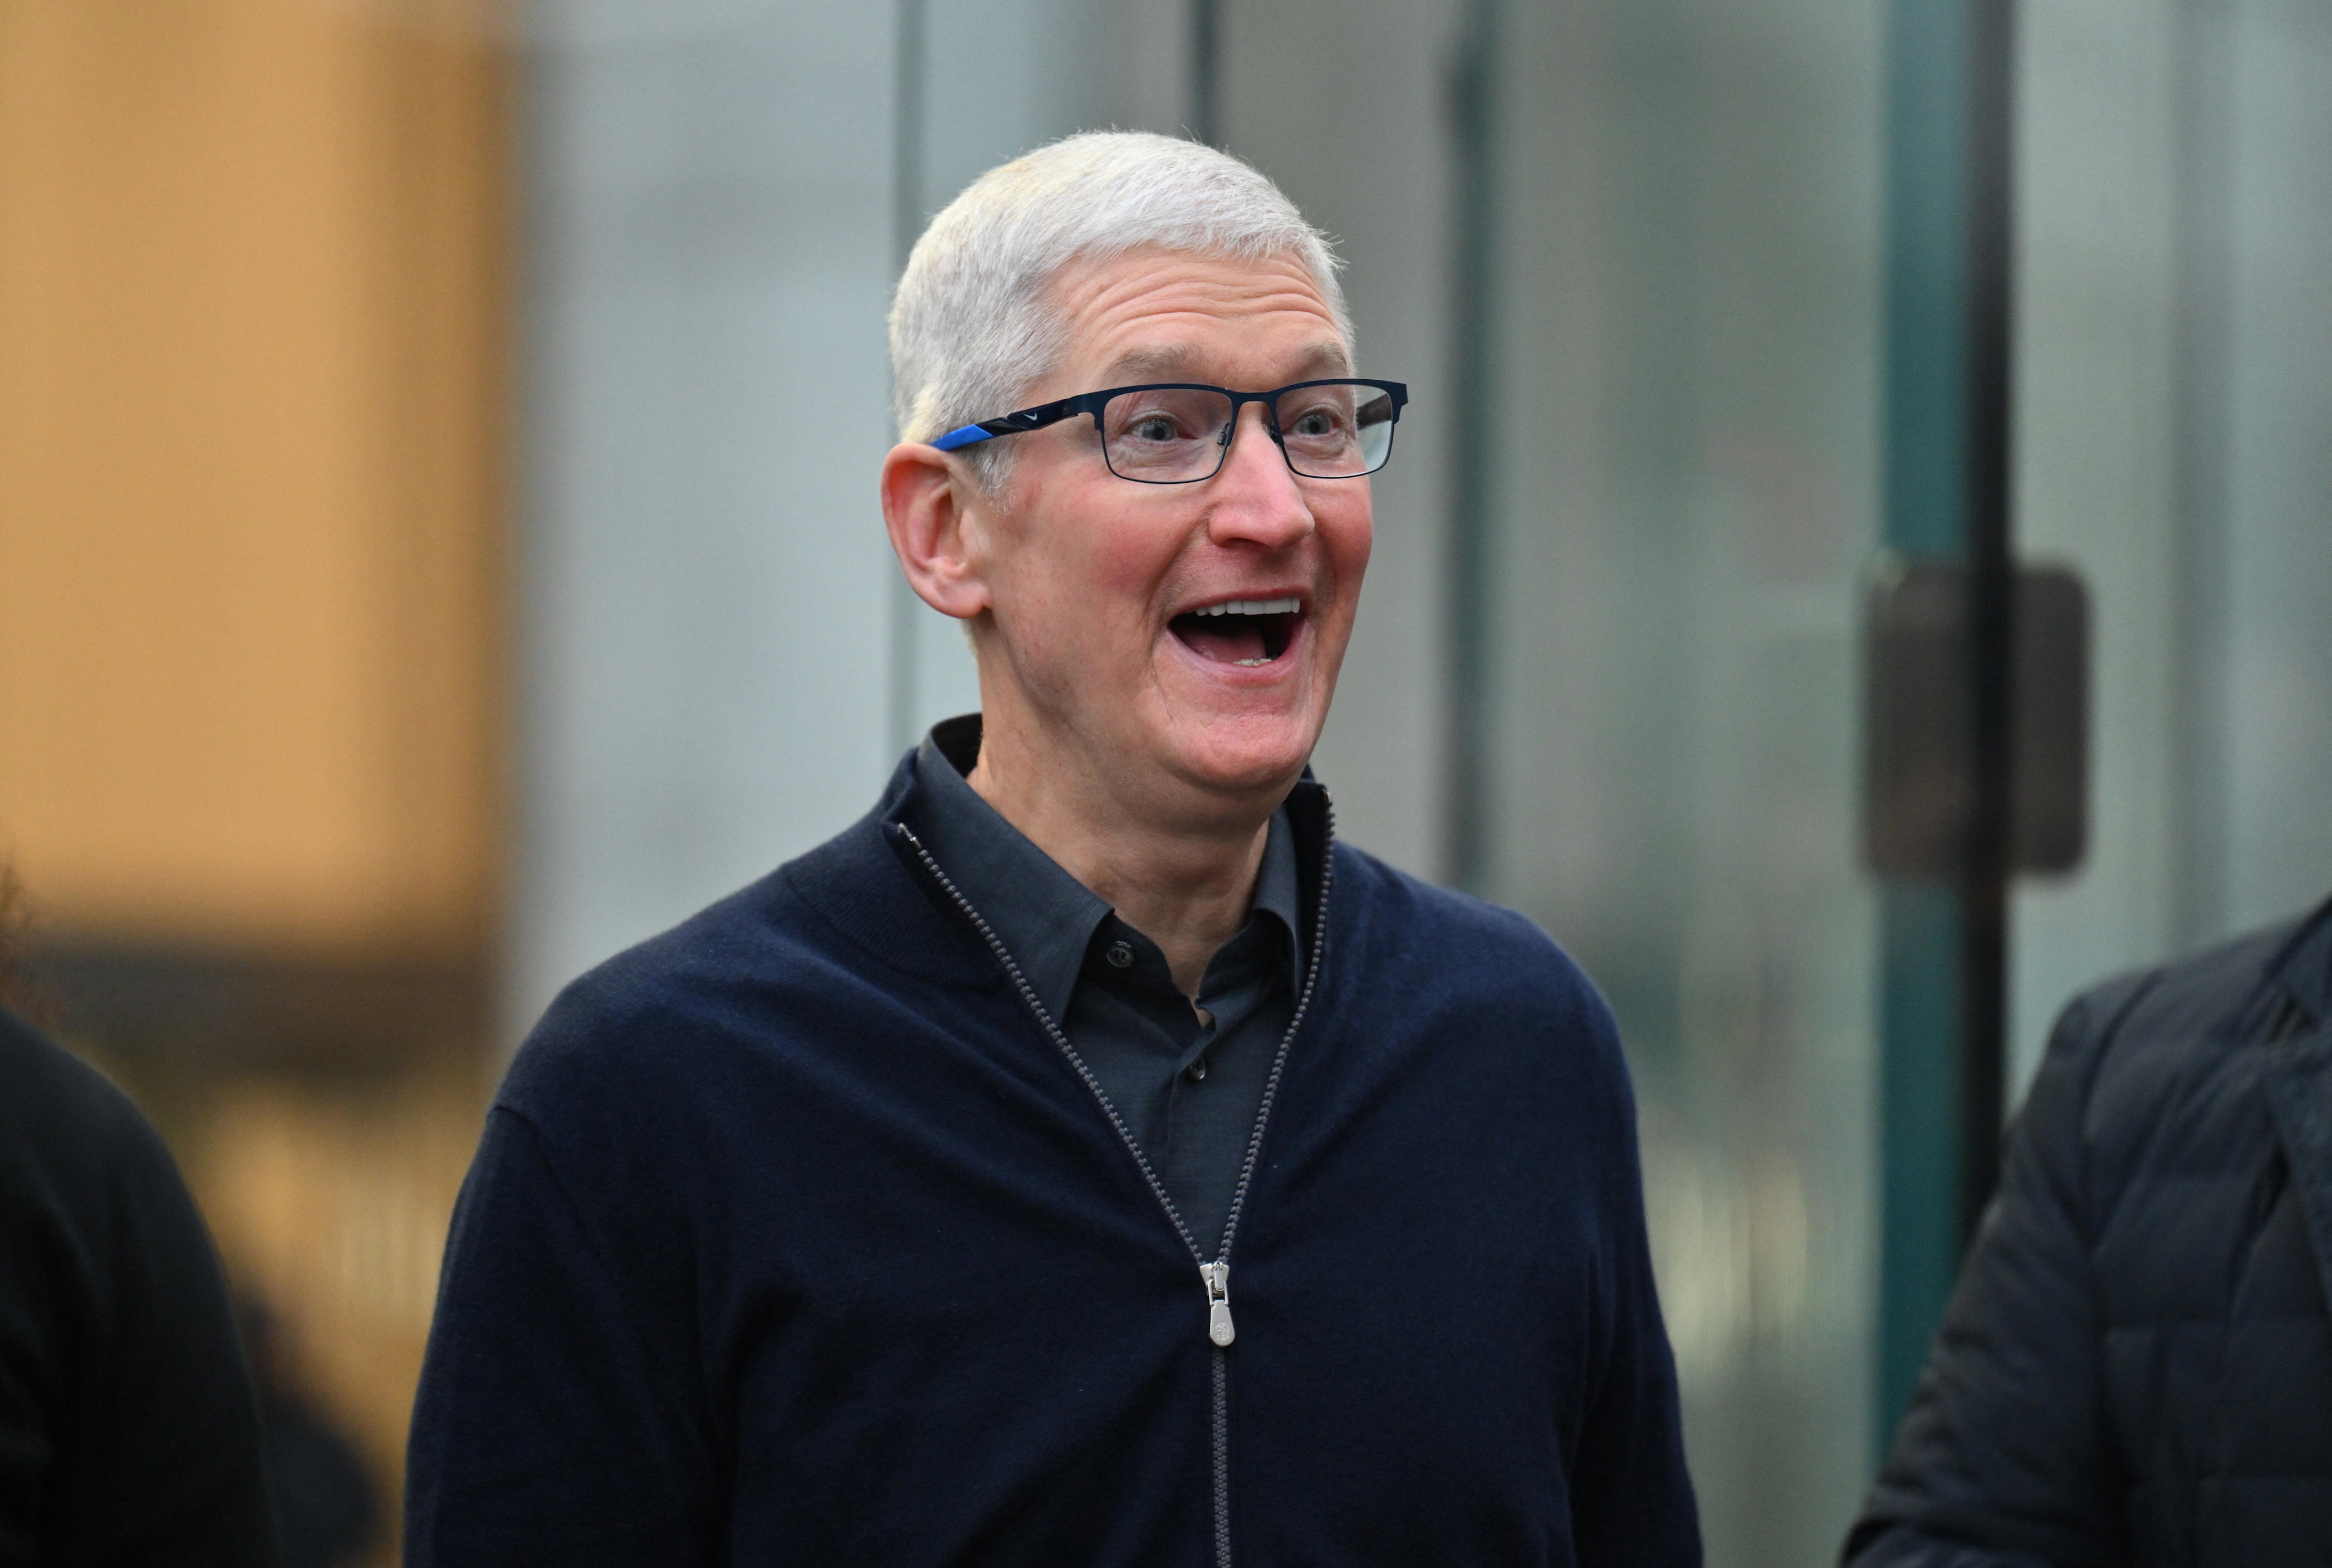 microsoft, iphone price cuts might have saved apple from an even bigger china crisis